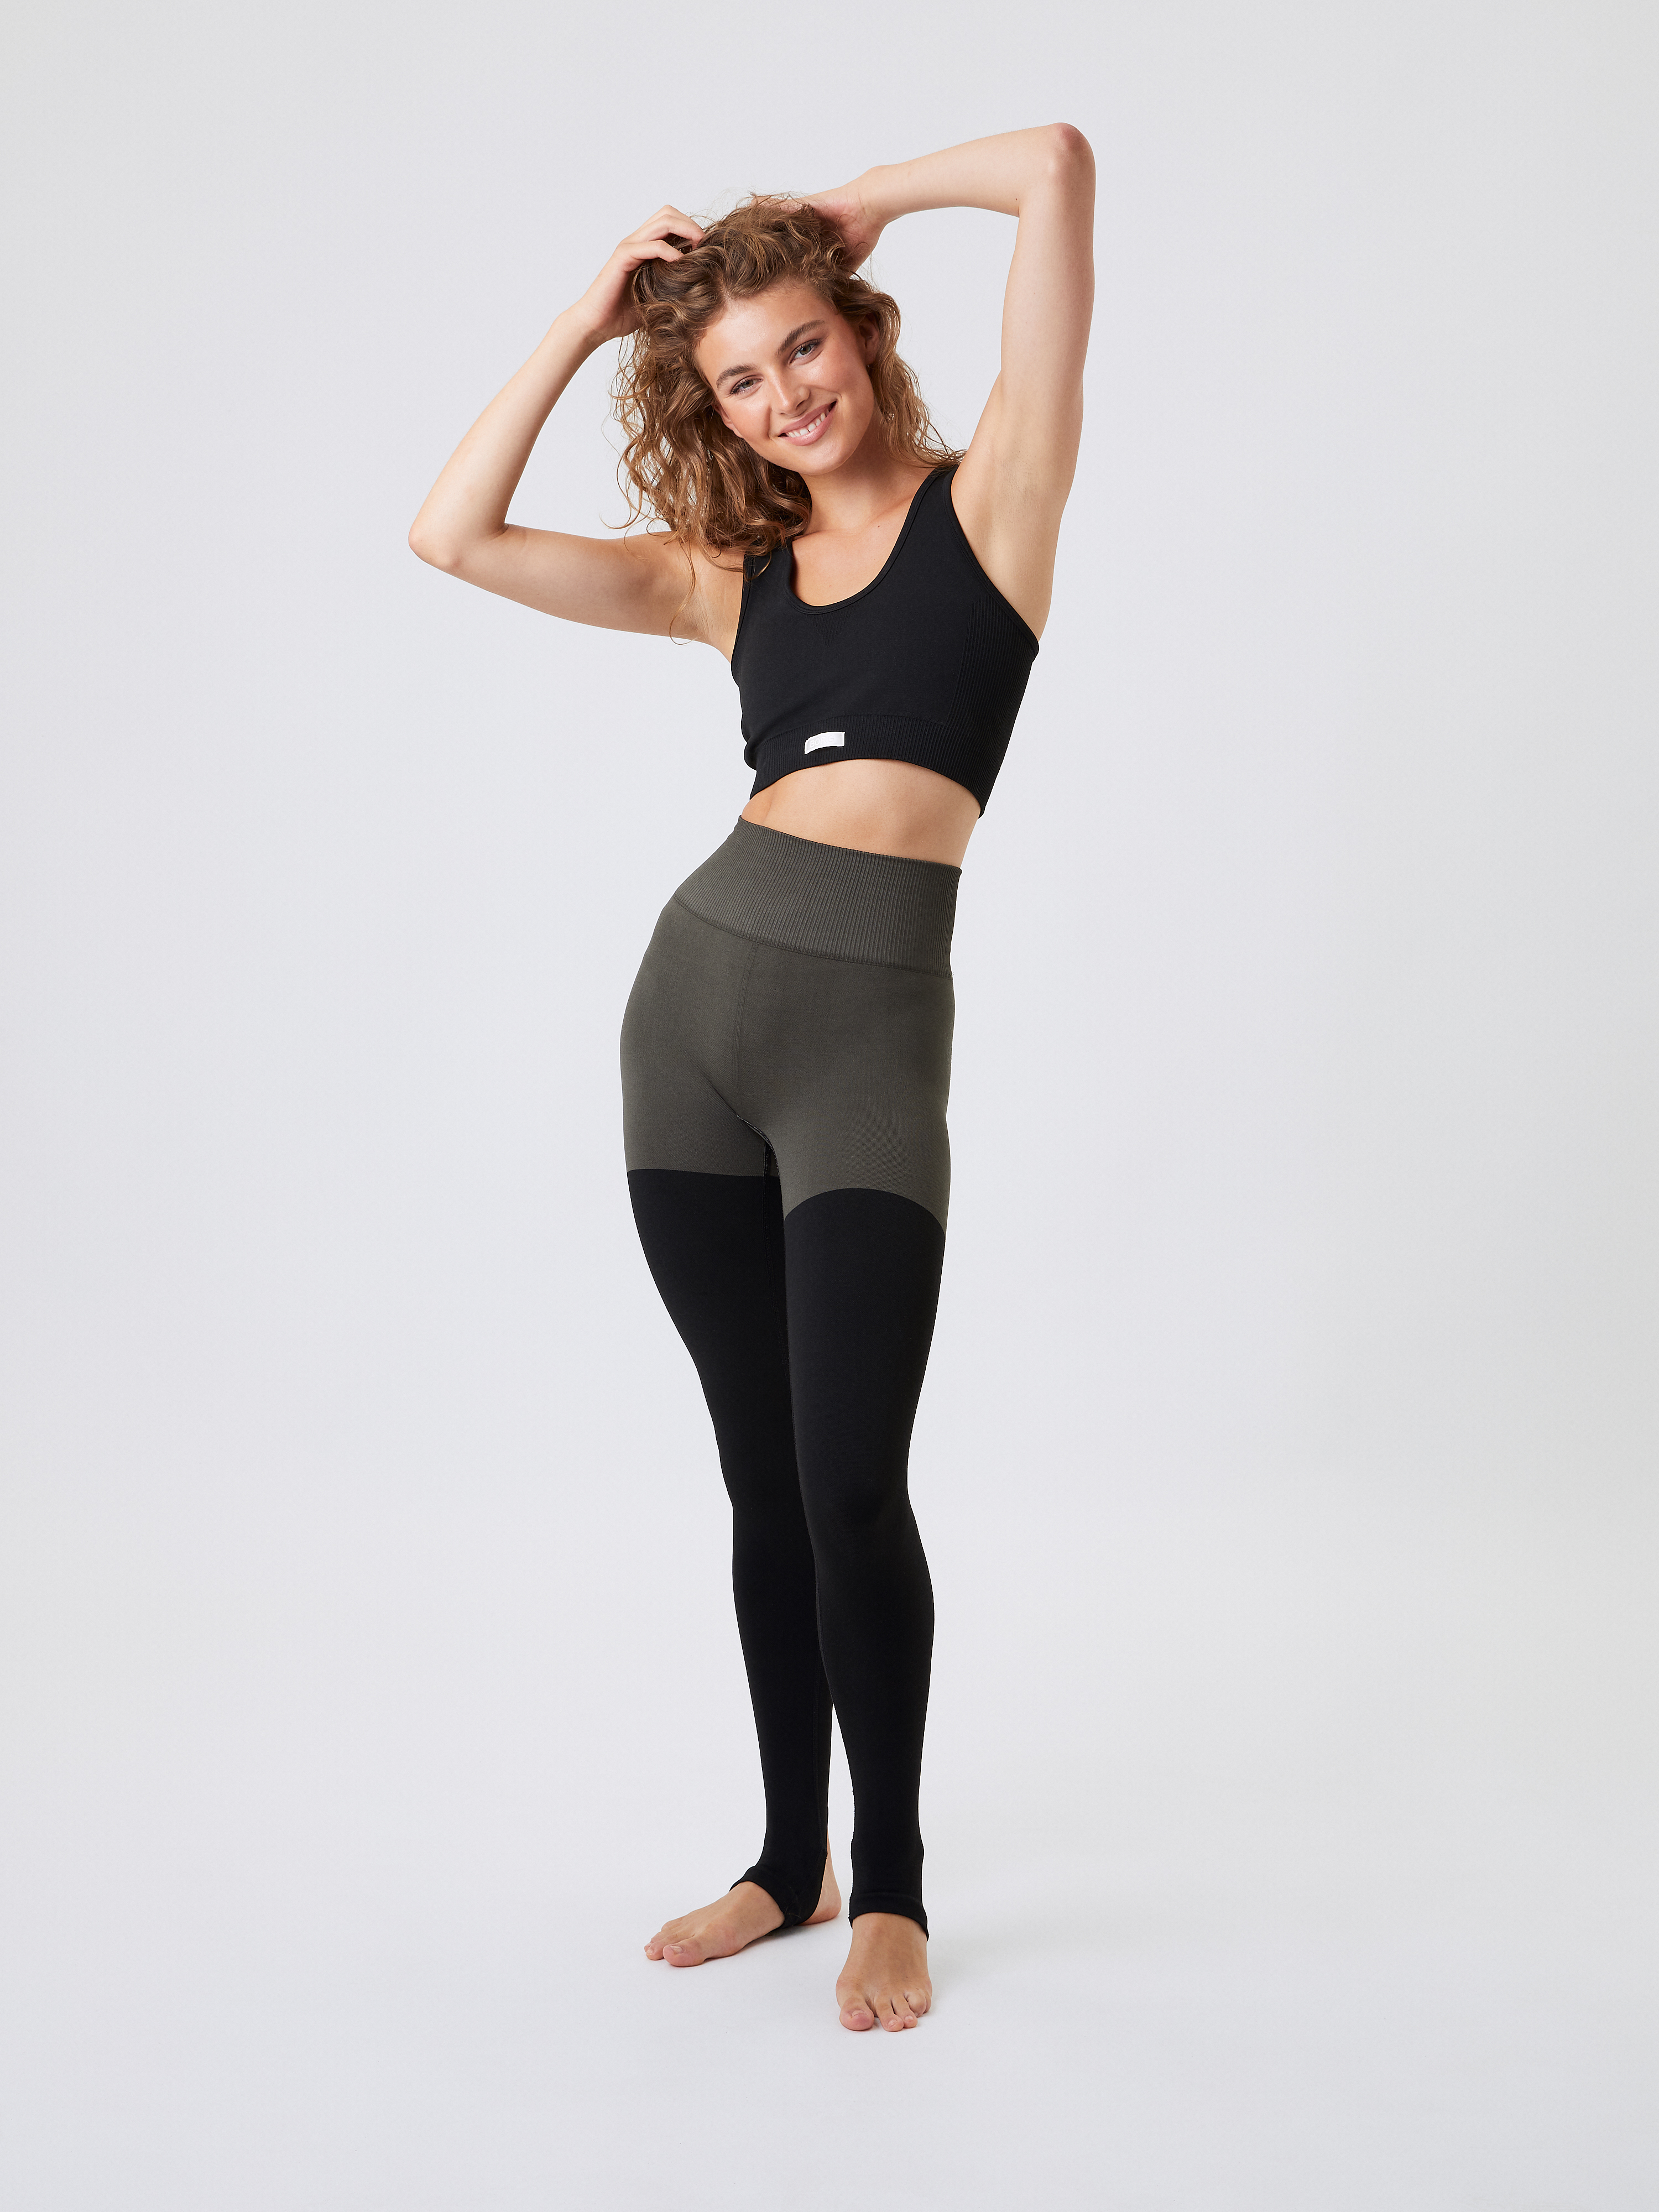 Cotton Yoga Pants – Olive Green and Sky Blue – Yoga Rudra